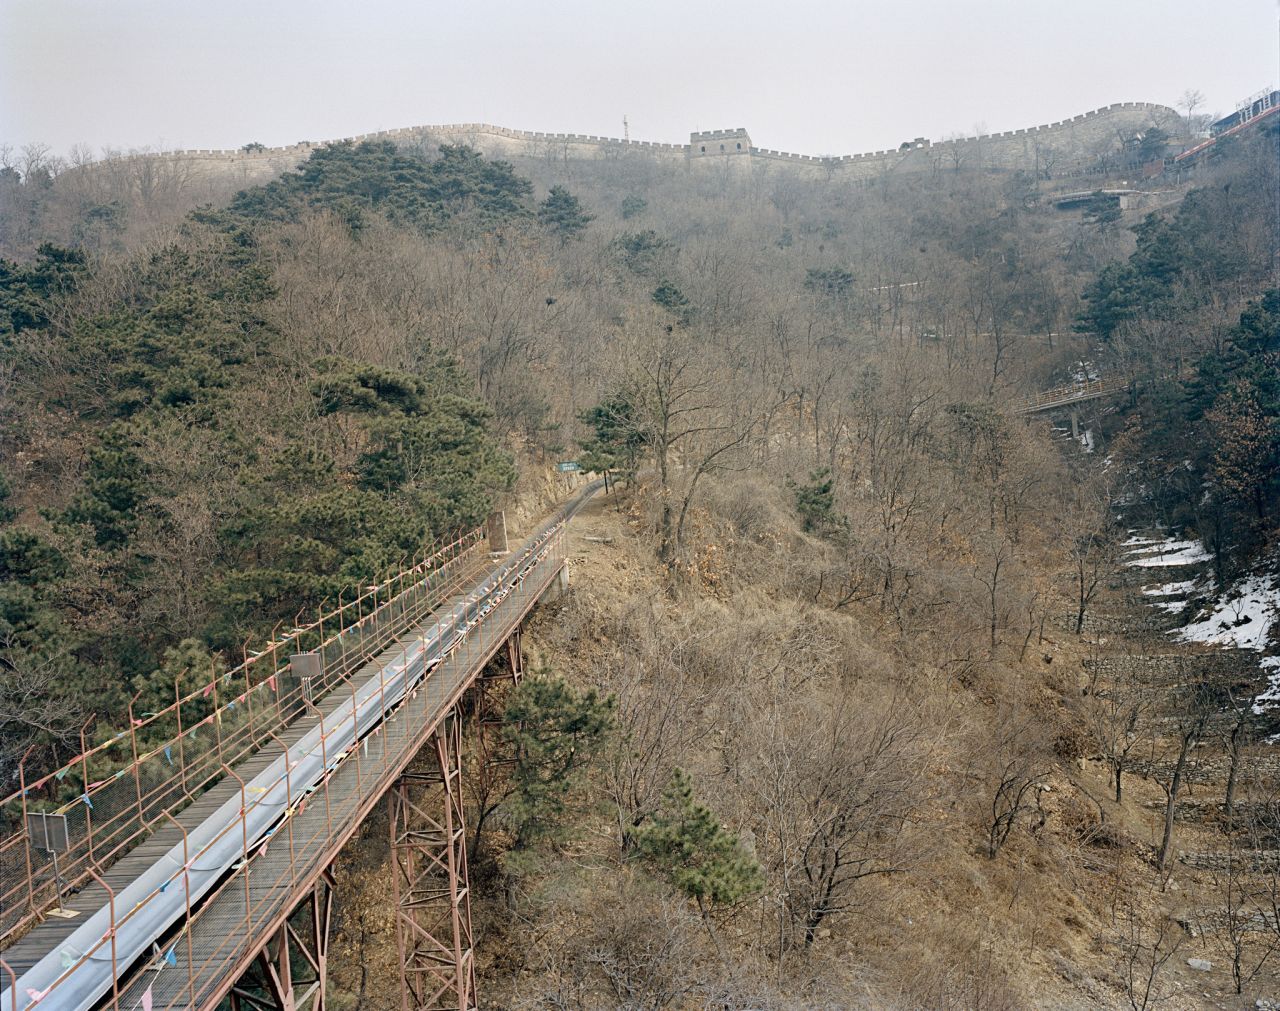 The Great Wall Toboggan is a treat for tourists visiting the Mutianyu section of the Great Wall. First Lady Michelle Obama took a ride when she visited China in 2014. This is one of the 54 photos featured in the book, "Chinese Fun." 